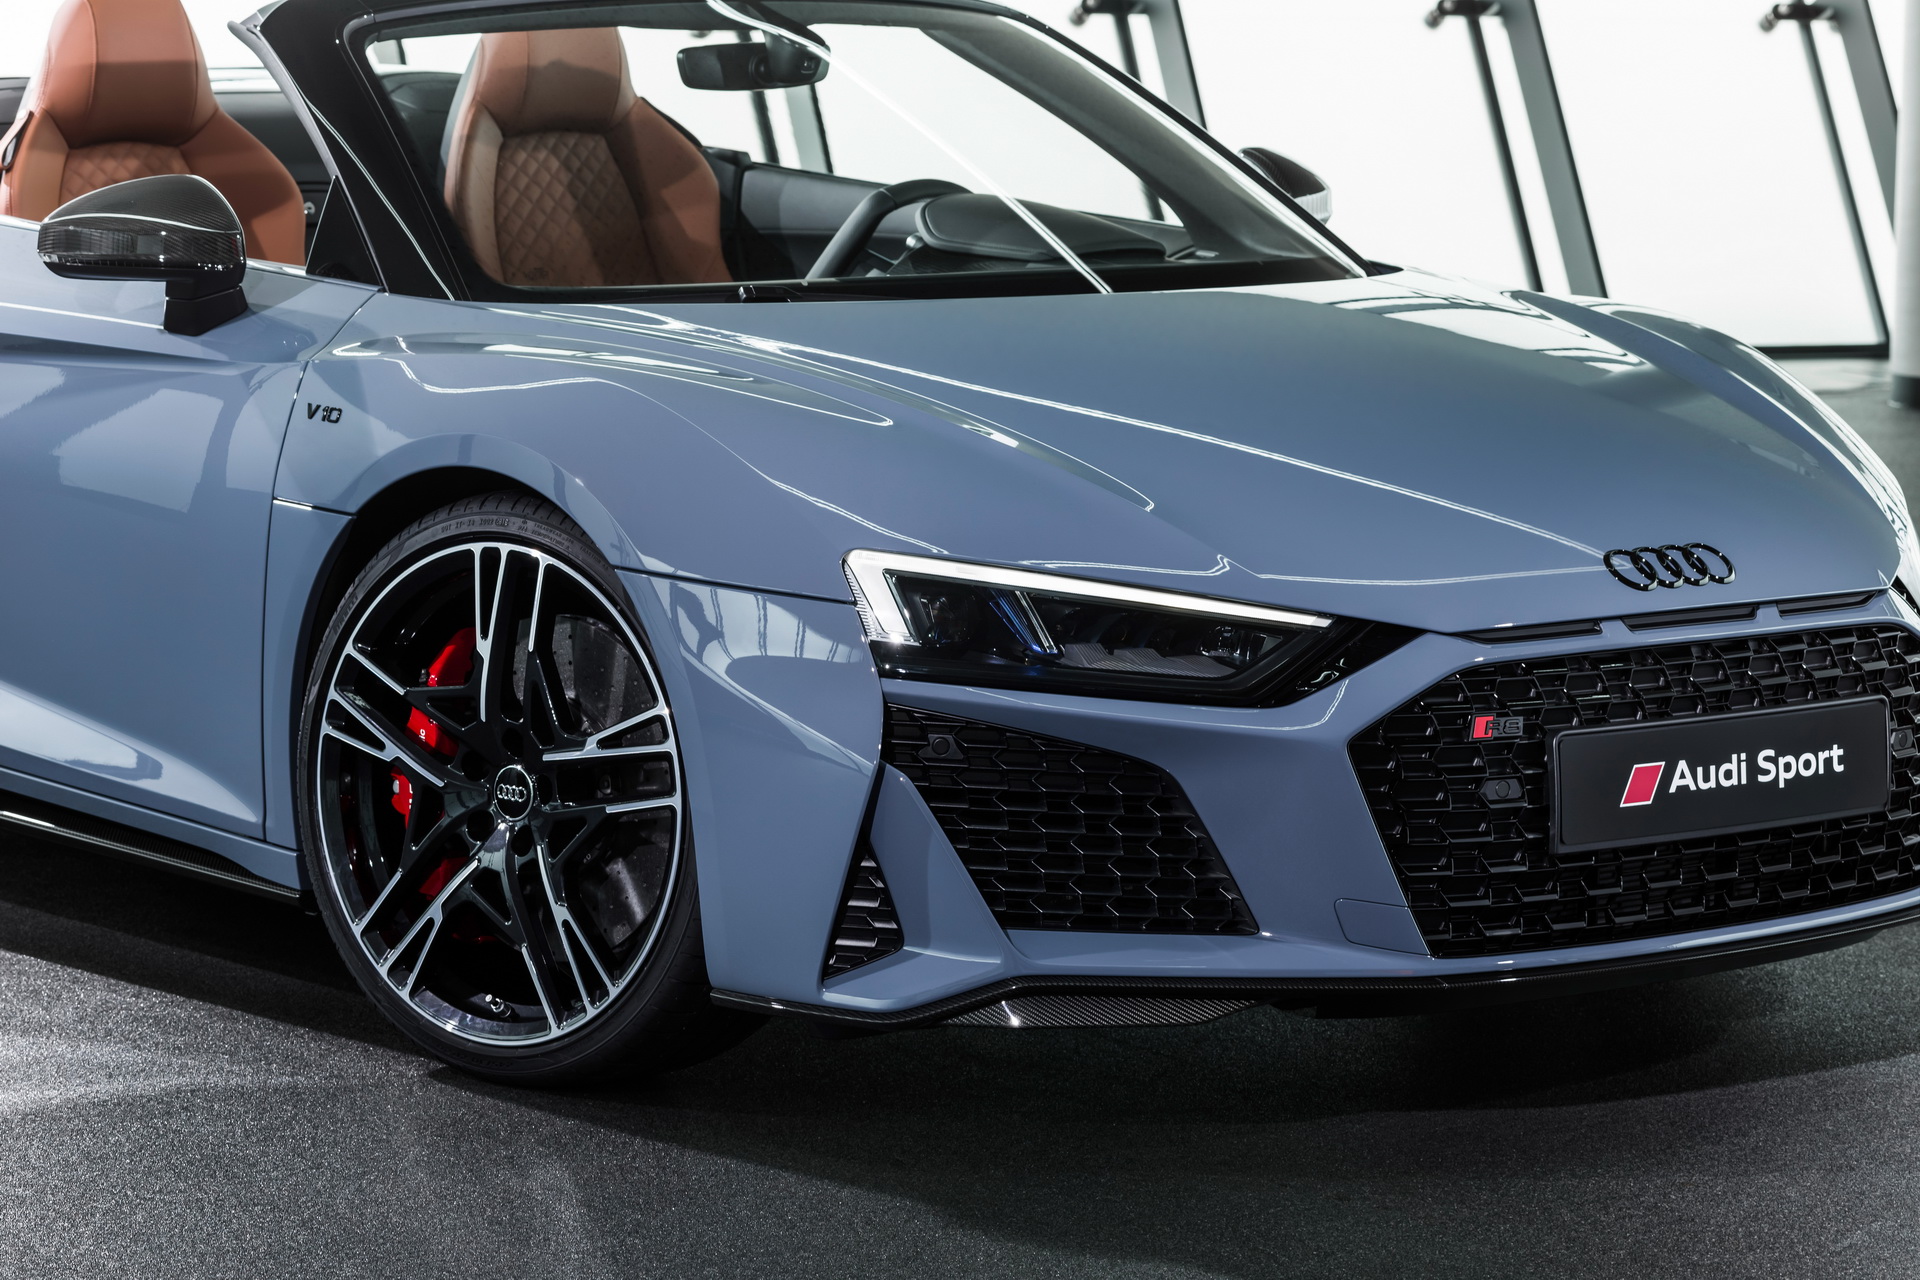 See The 2019 Audi R8 Coupe And Spyder Facelift From Every Angle In Mega